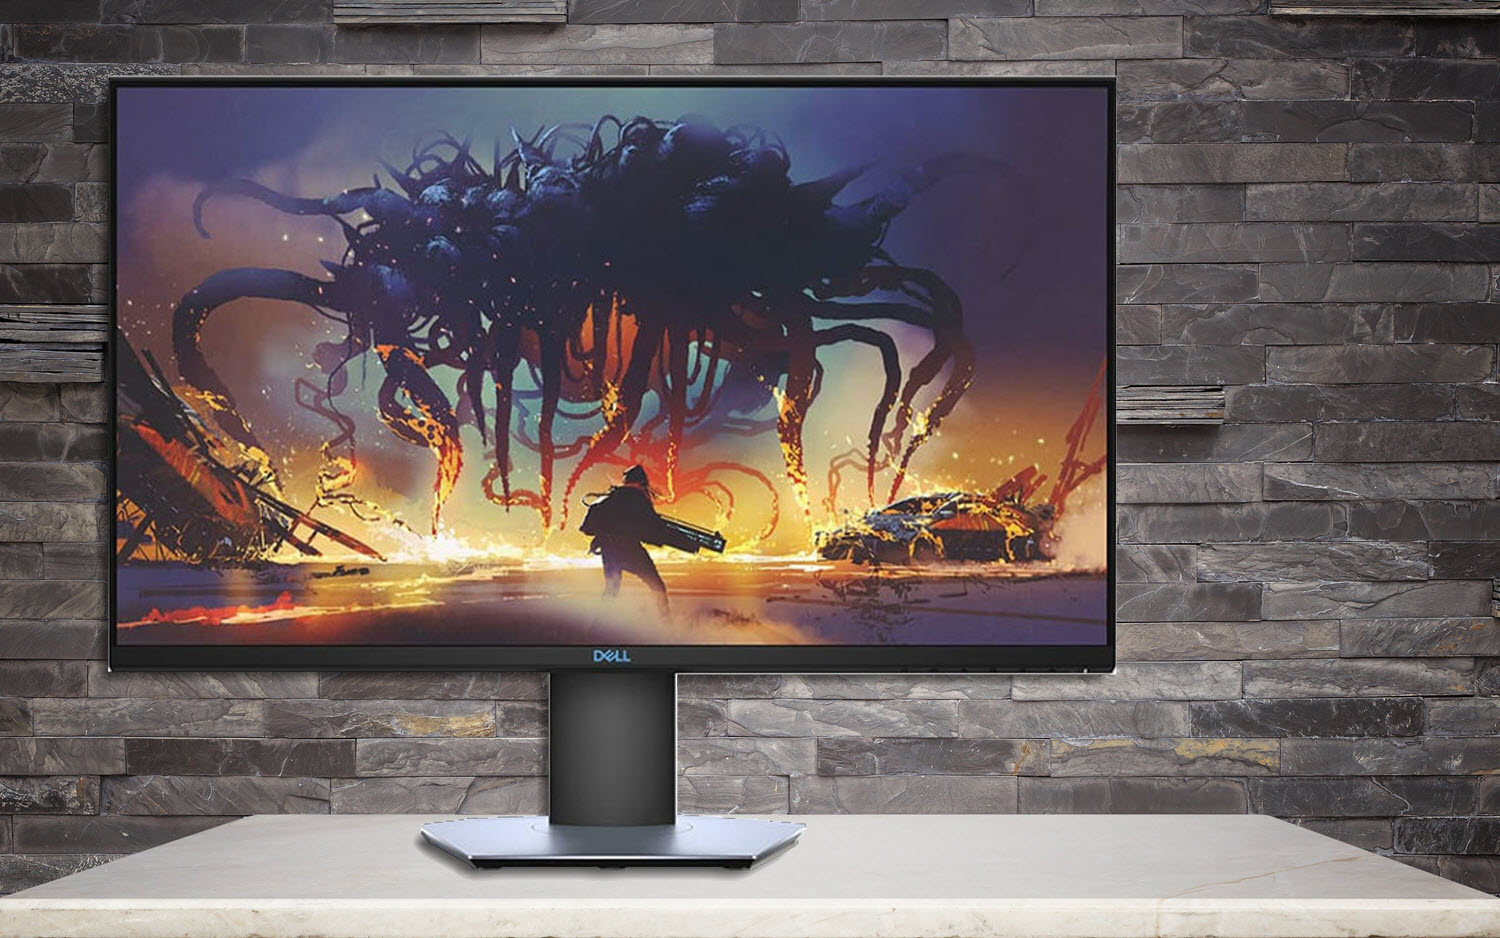 7 Amazing Dell 27 Gaming Monitor – S2719Dgf For 2023